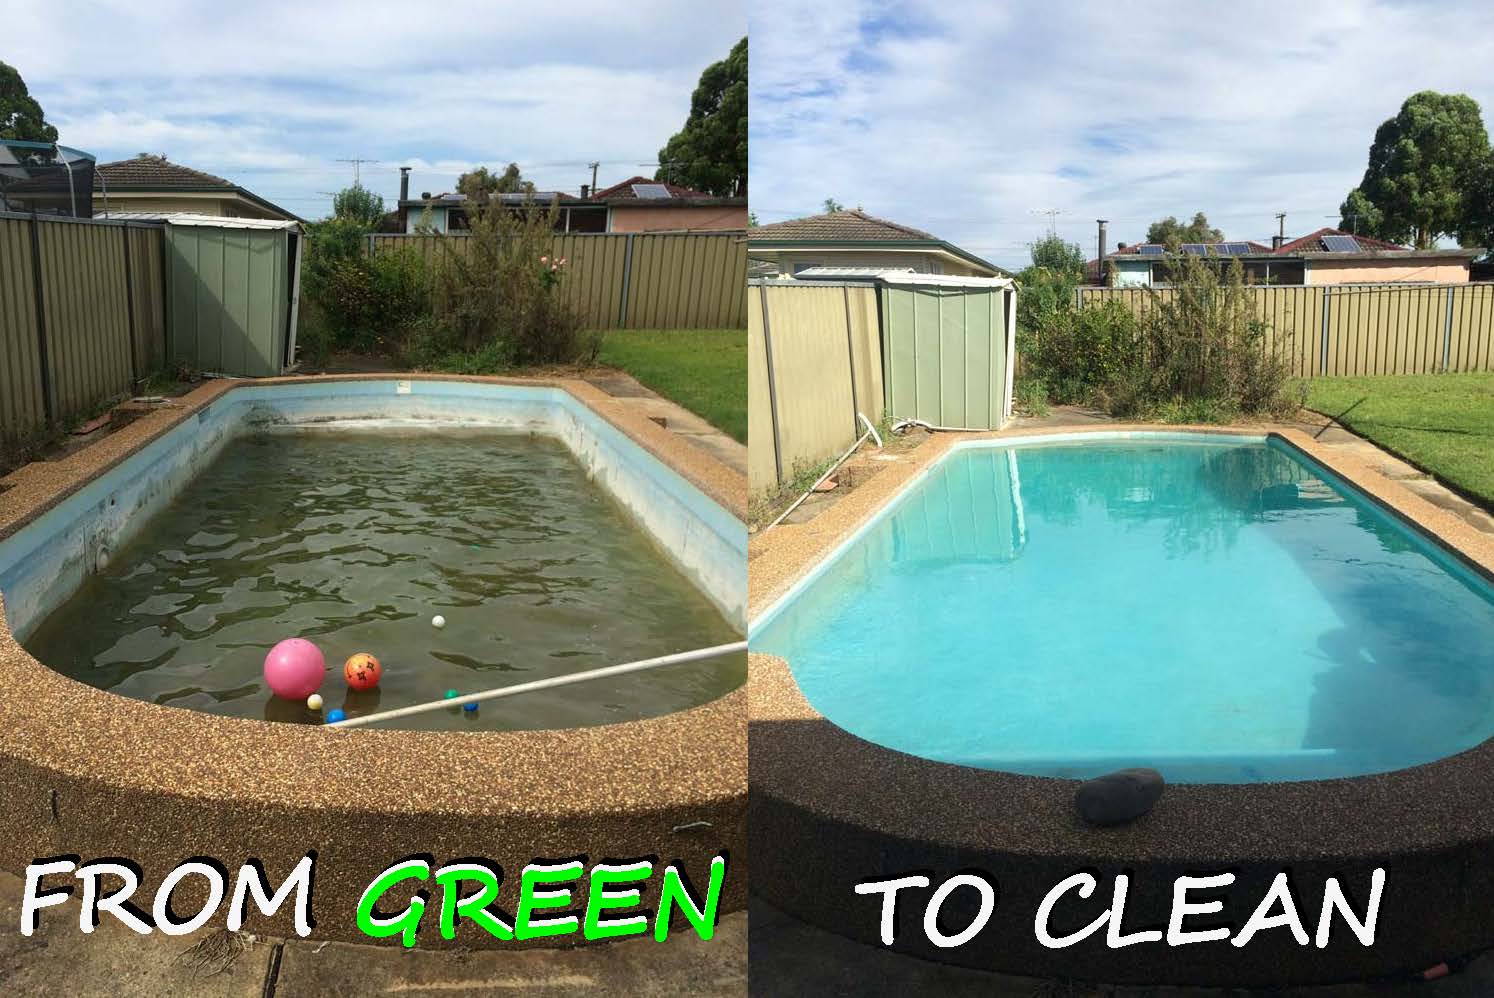 Step by step guide on how to clean a green swimming pool